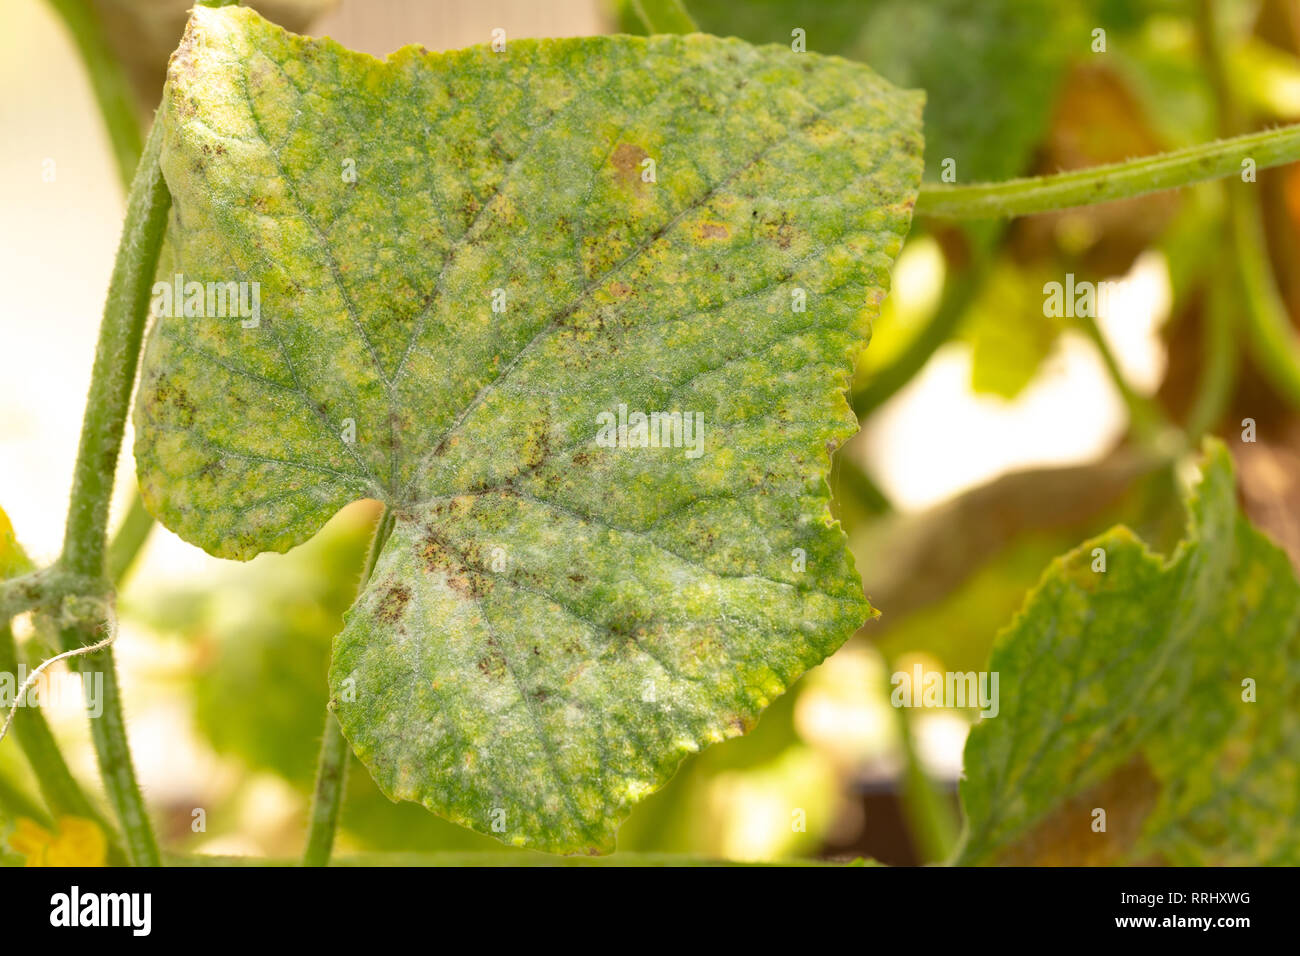 Mildew on the leaf of a cucumber in a greenhouse Stock Photo